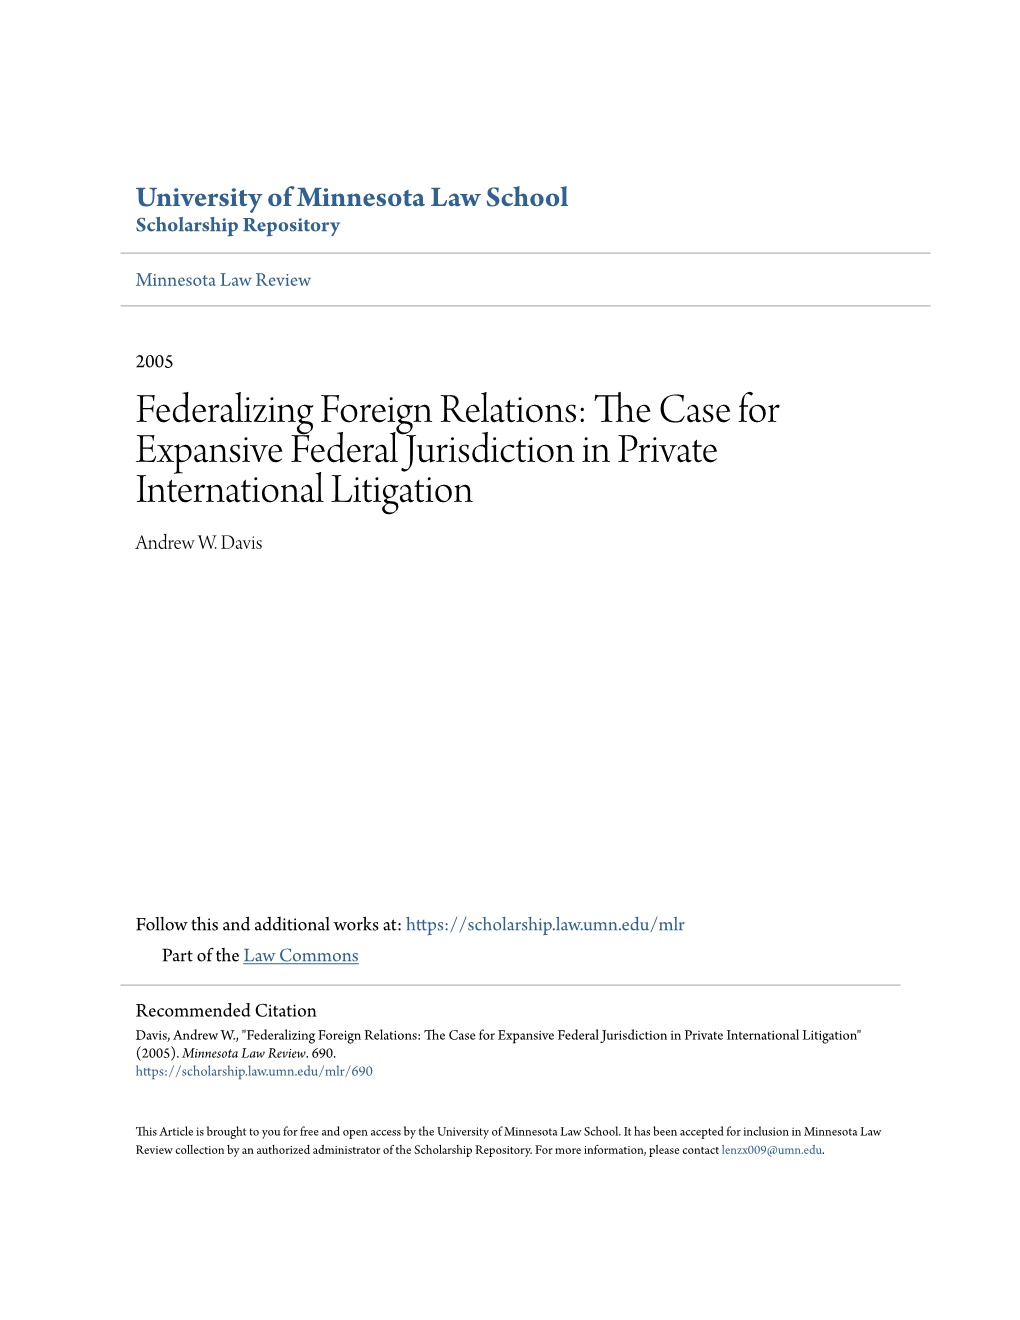 Federalizing Foreign Relations: the Ac Se for Expansive Federal Jurisdiction in Private International Litigation Andrew W